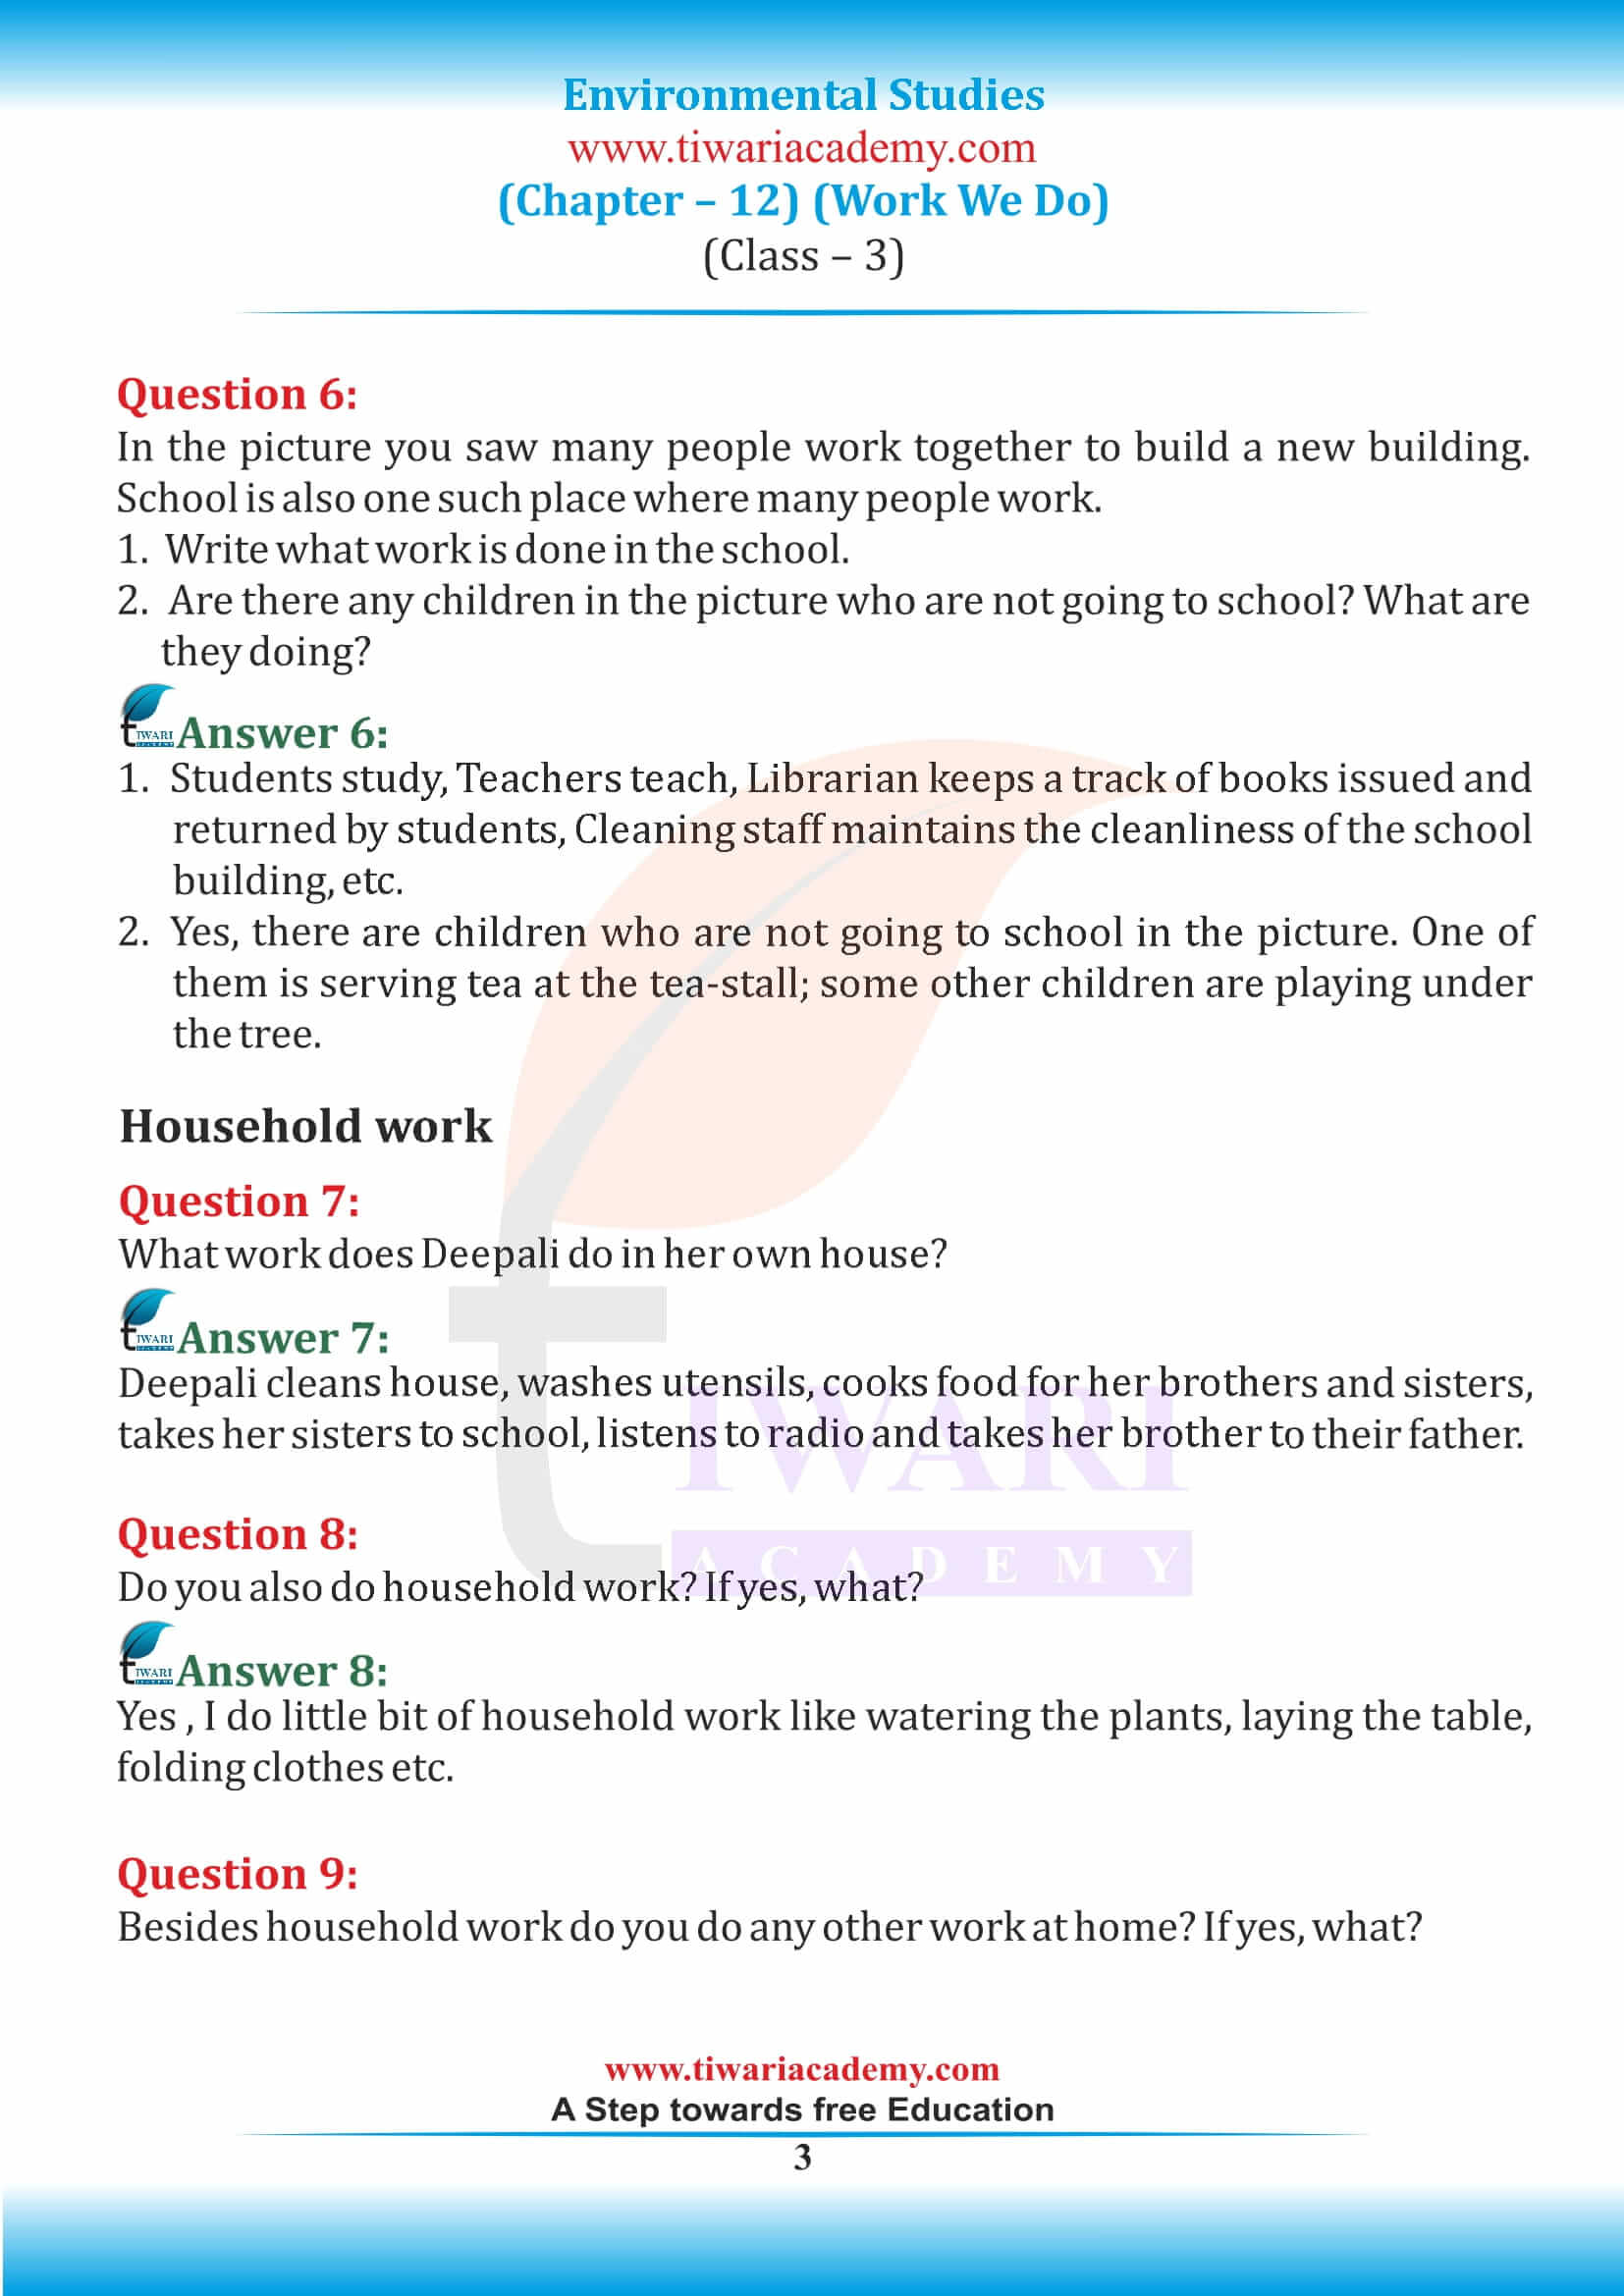 NCERT Solutions for Class 3 EVS Chapter 12 in English Medium